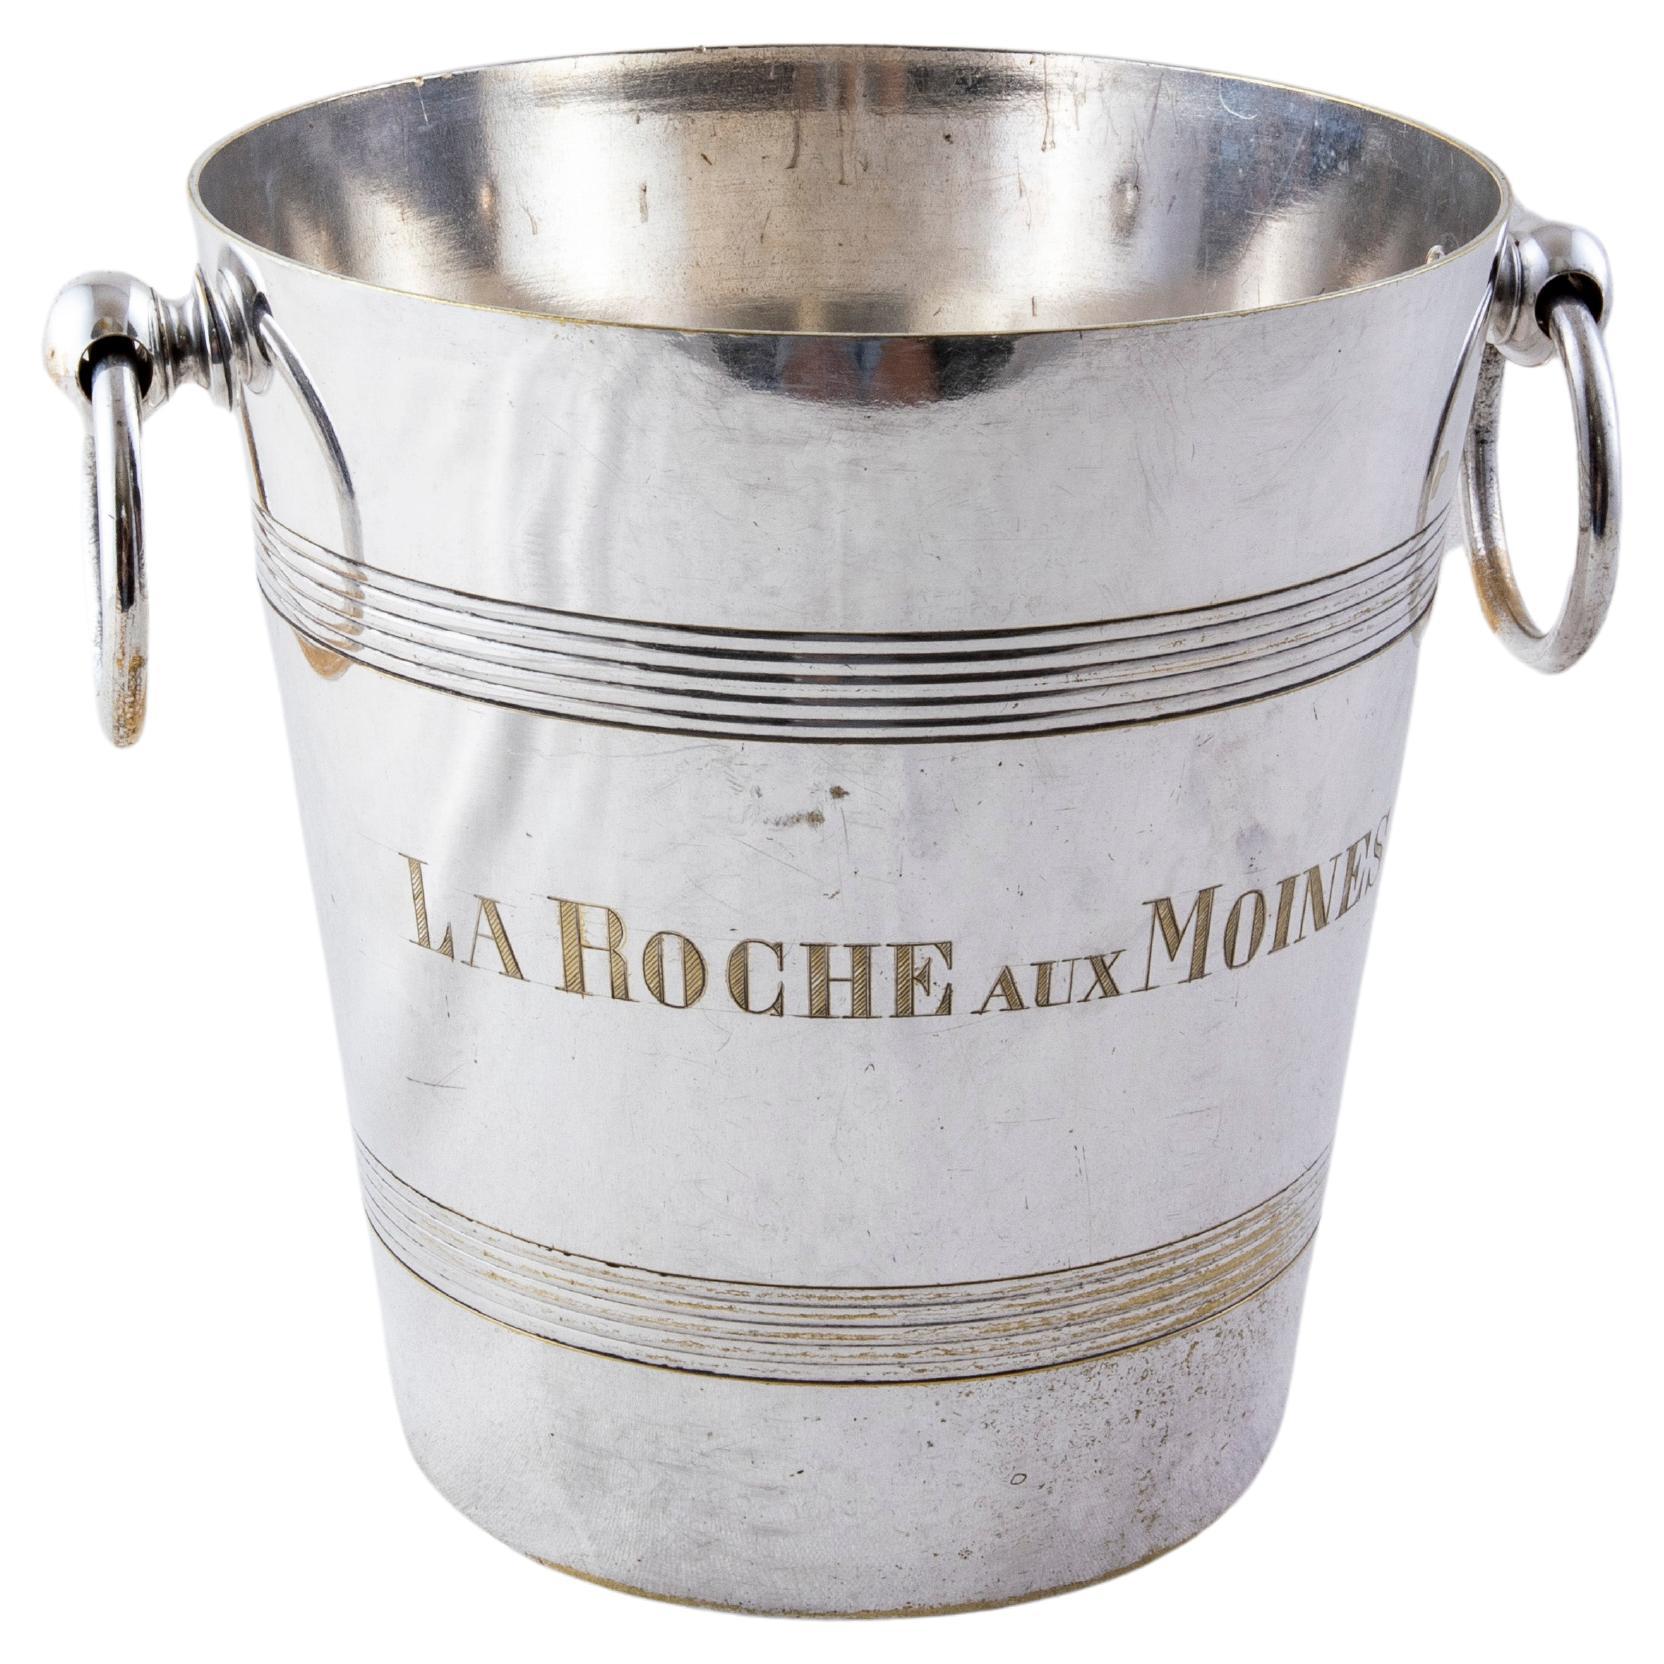 This mid-twentieth century French silver plate wine chiller or champagne bucket is engraved on one side with the name of the vineyard in the Loire Valley, La Roche aux Moines. The other side is engraved 1er Cru d'Anjou indicating the classification